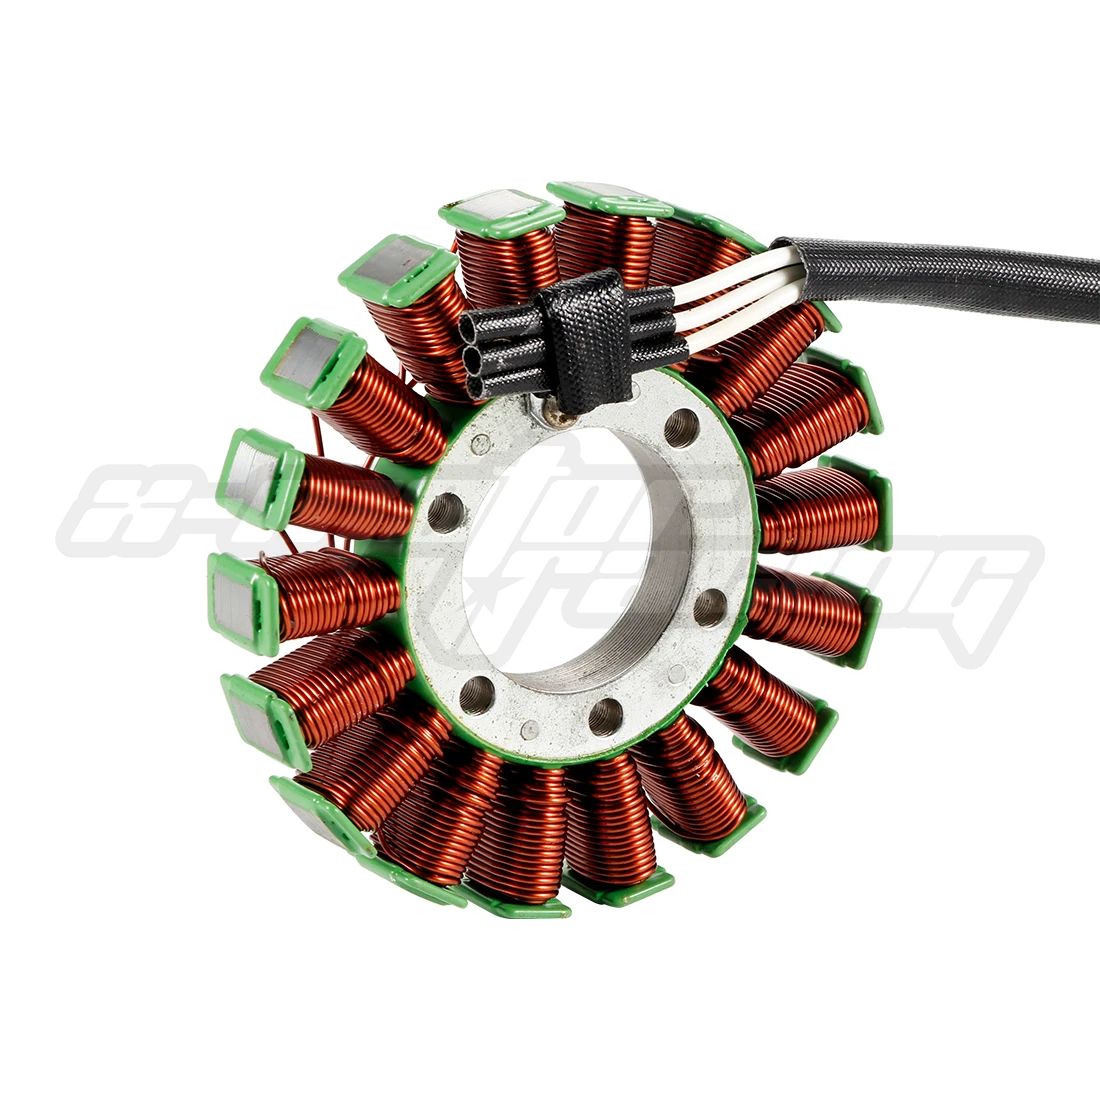 Motorcycle Generator Magneto Stator Coil For Yamaha YZF R6 2006-2016 2C0-81410-00-00 2C0-81410-01-00 enlarge